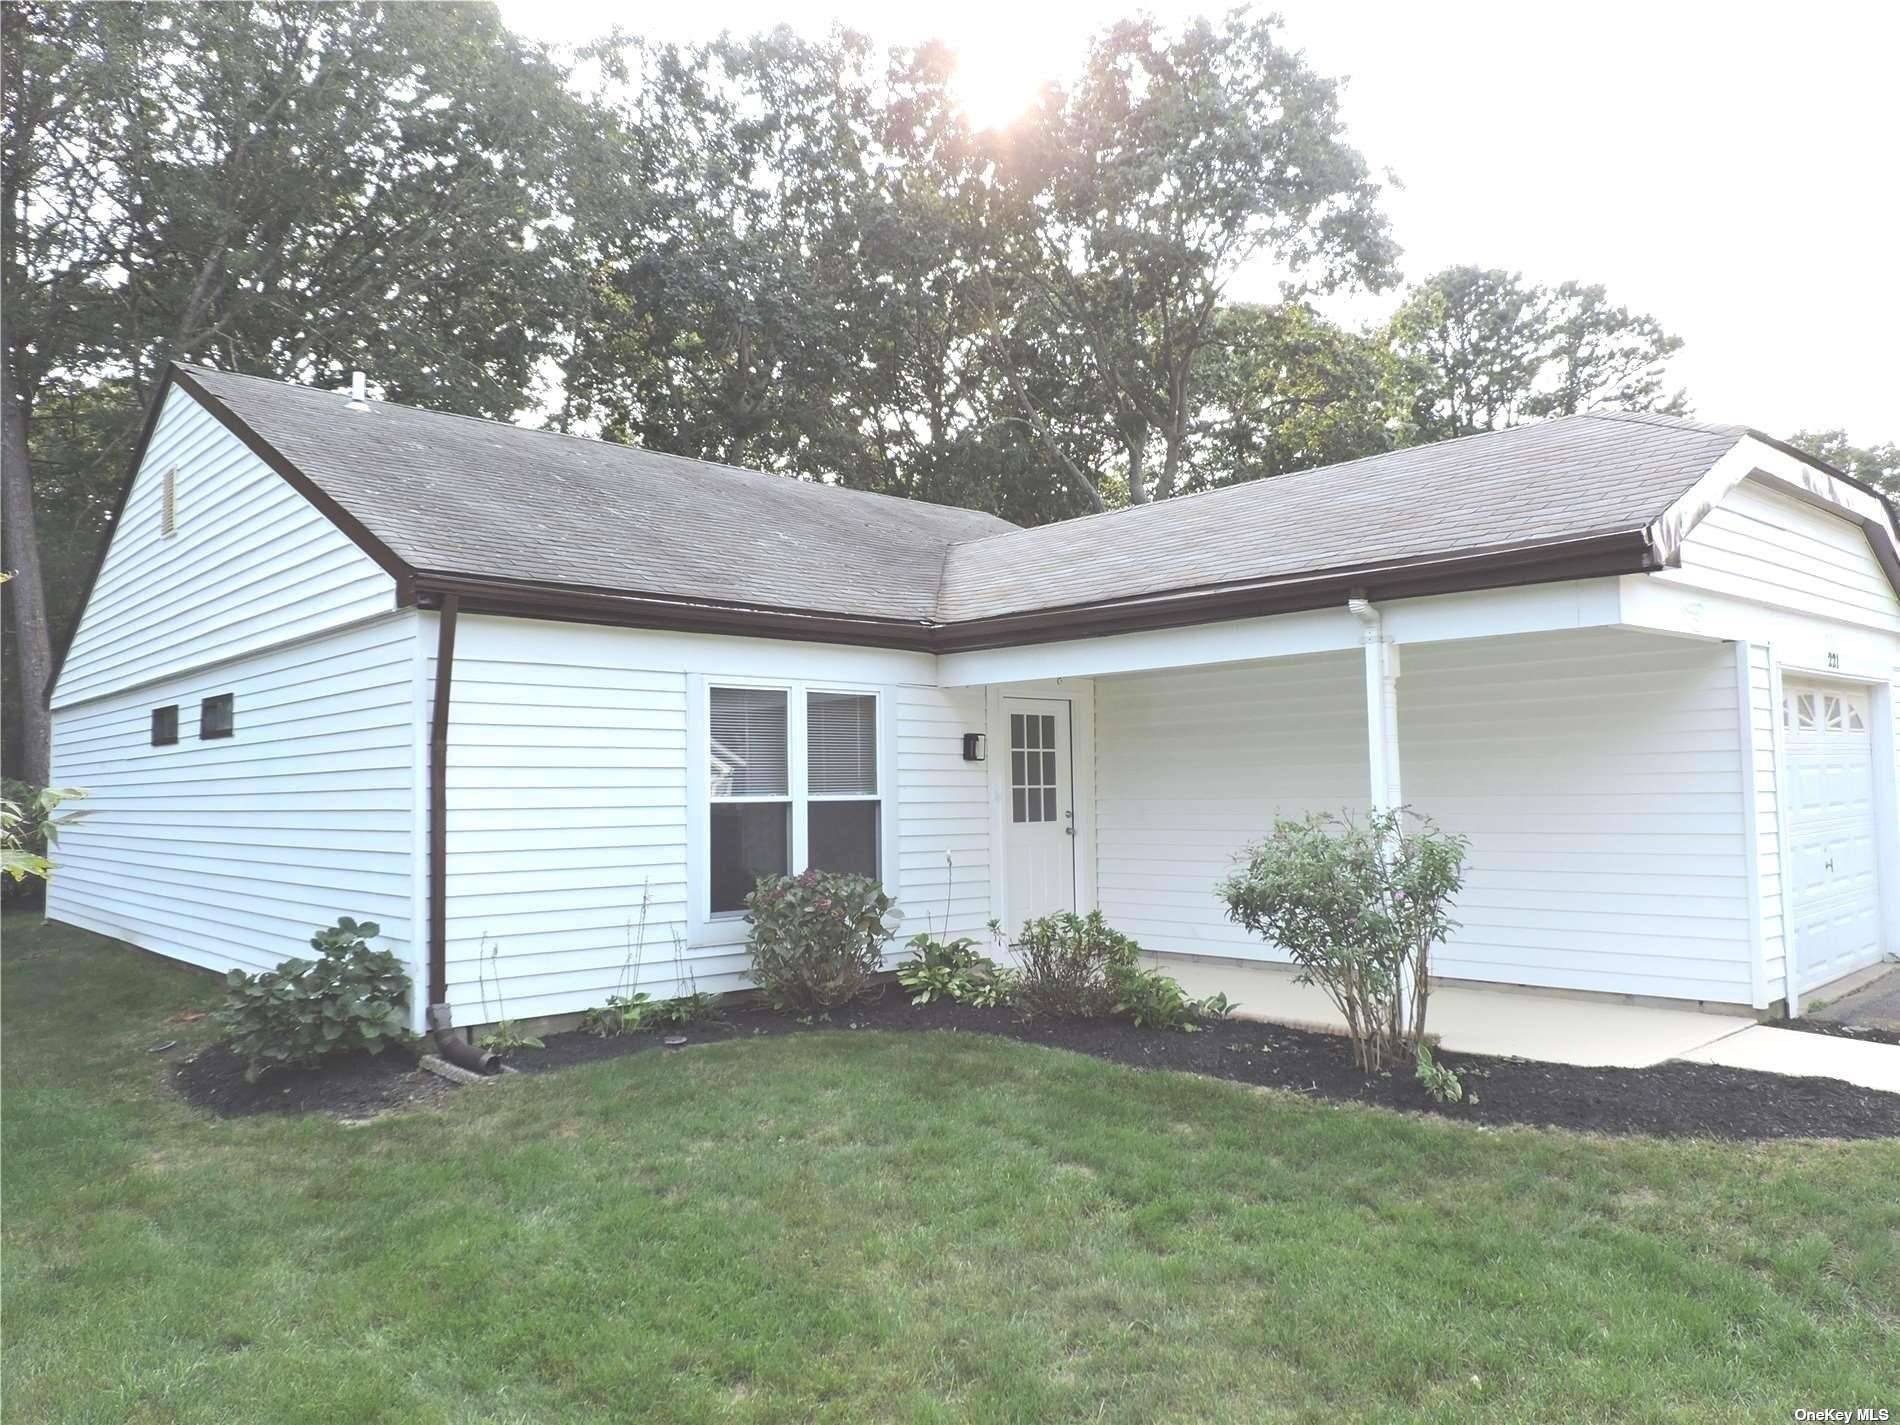 Beautifully renovated home in picture perfect location bordering wooded area.